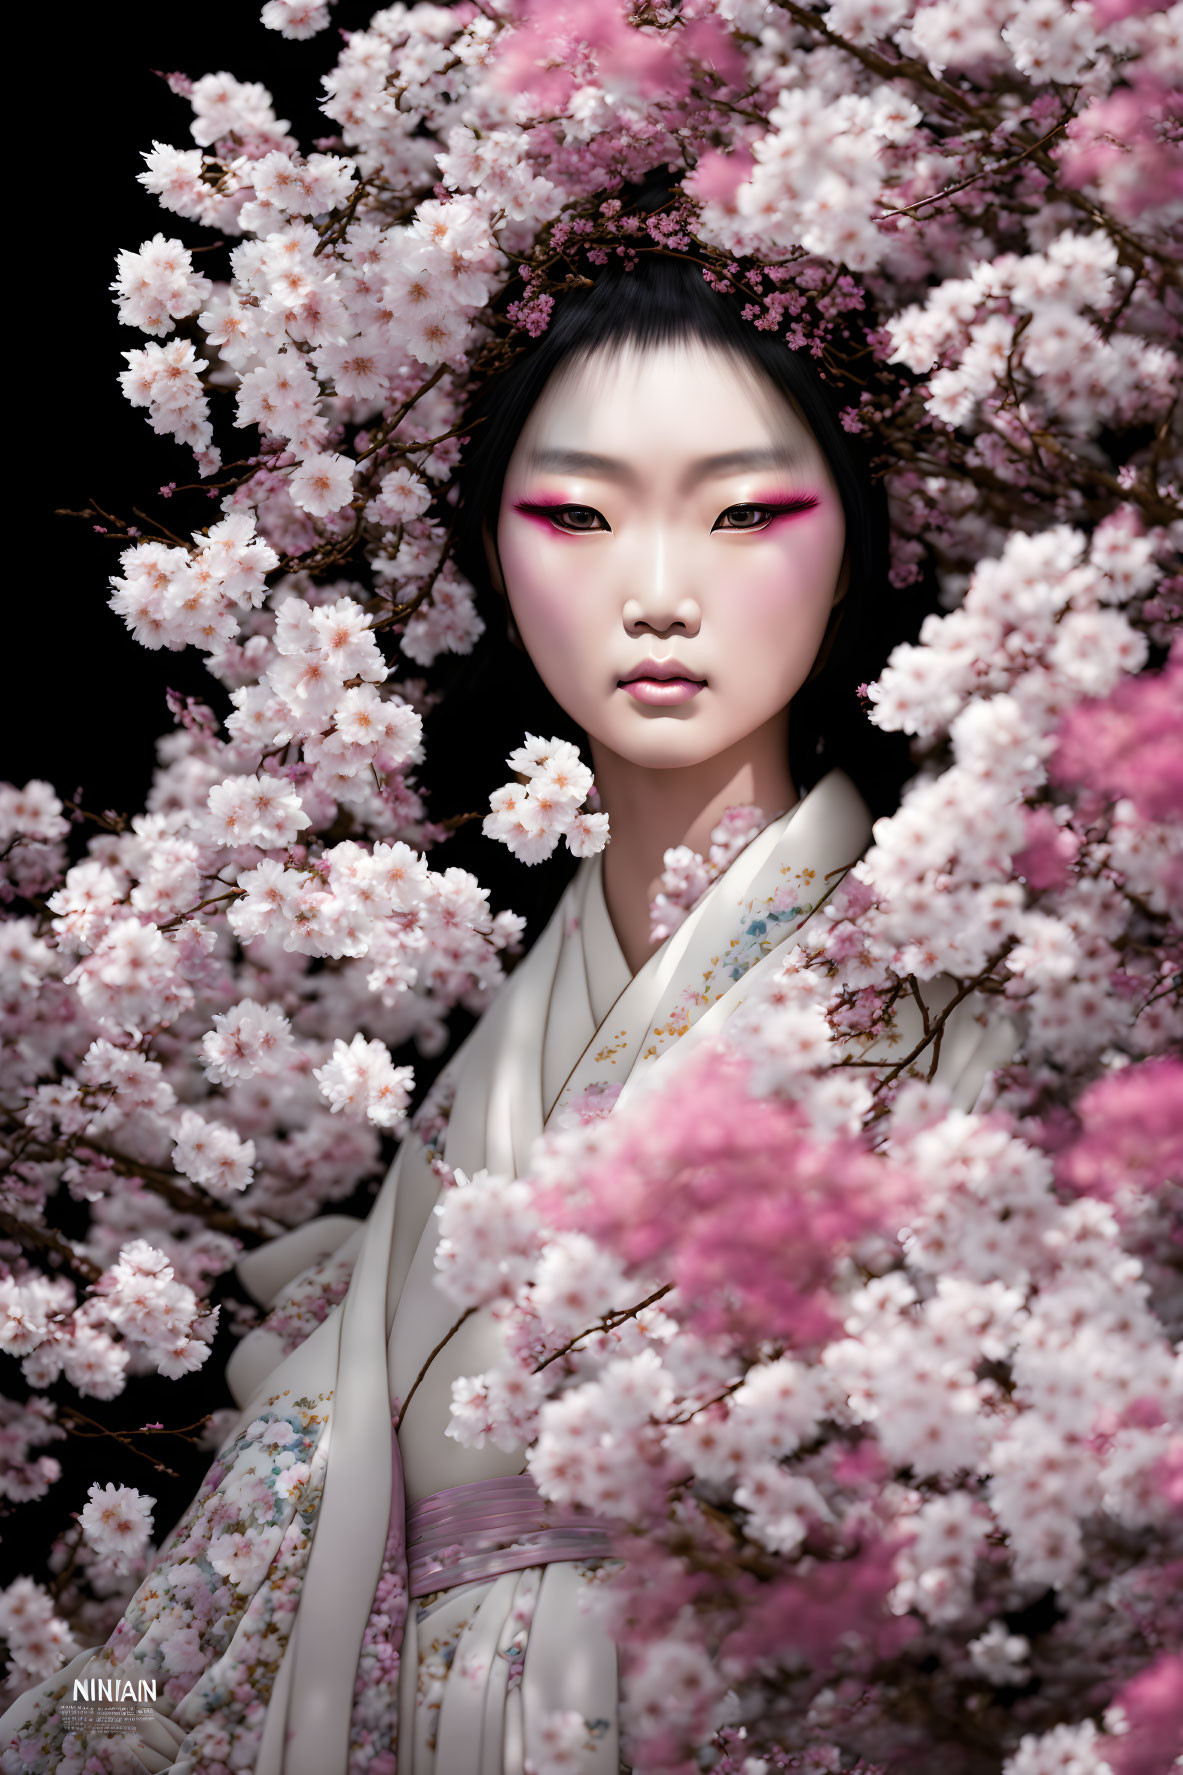 Digital artwork: Woman in East Asian attire with cherry blossoms & red eye makeup